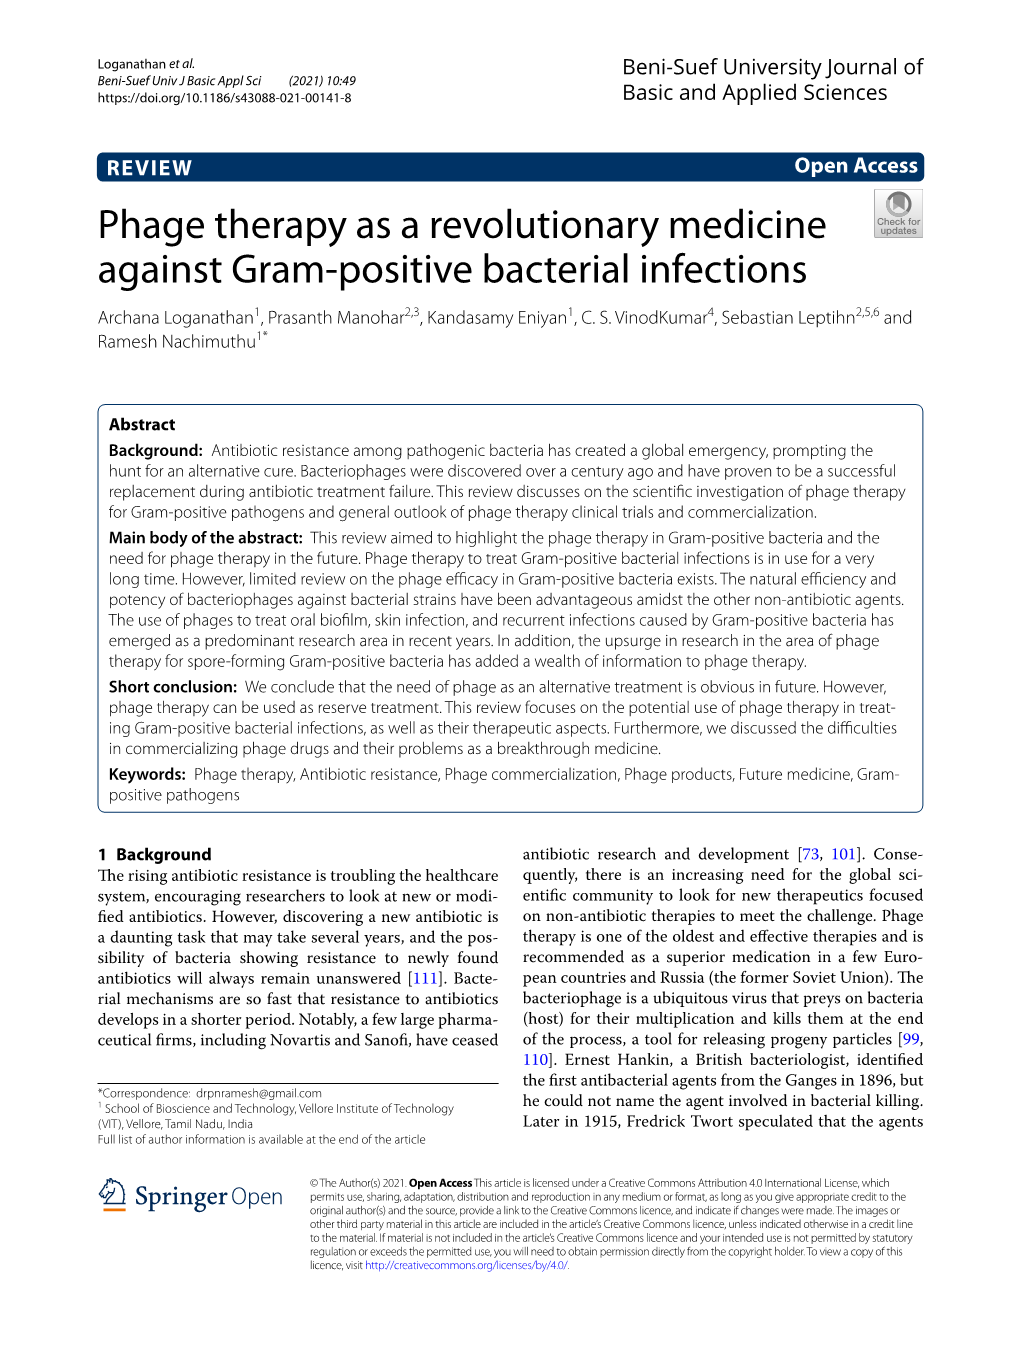 Phage Therapy As a Revolutionary Medicine Against Gram-Positive Bacterial Infections